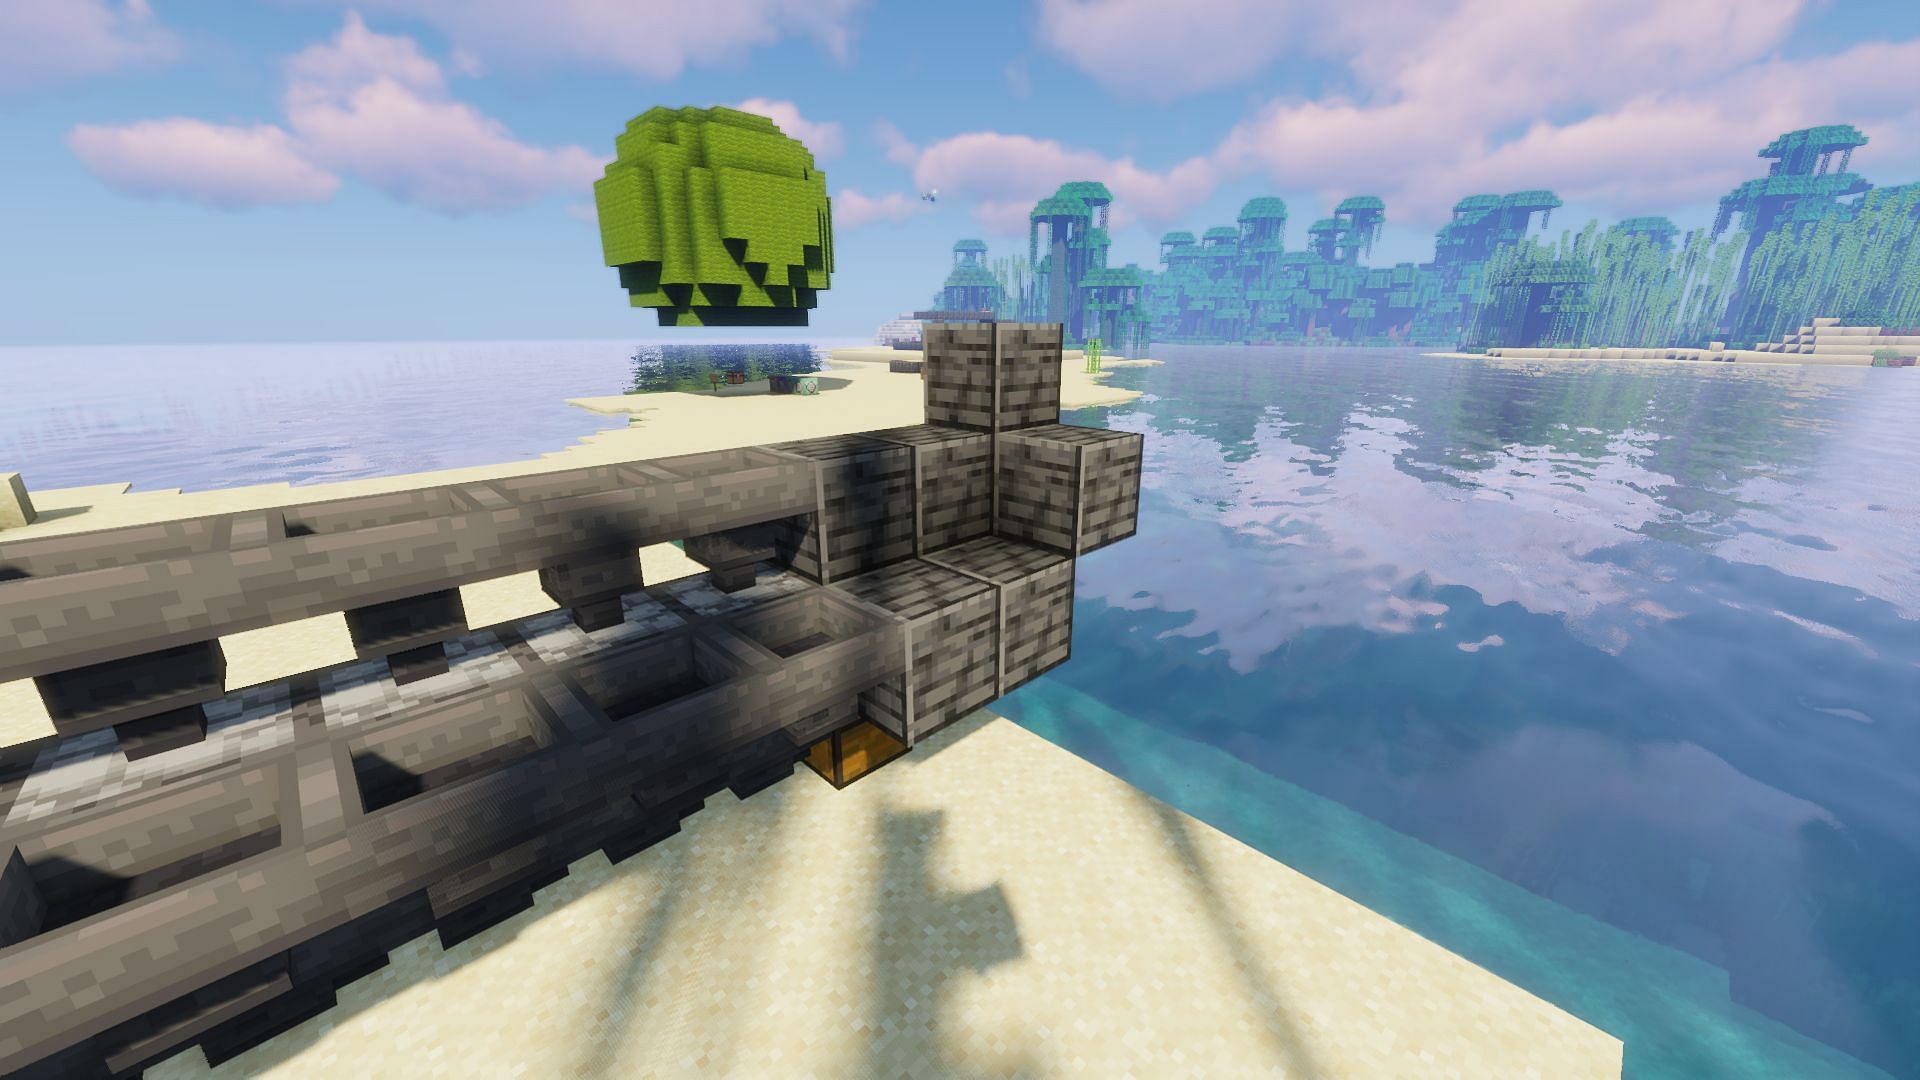 The two Ls added to one side of the smelter (Image via Minecraft)